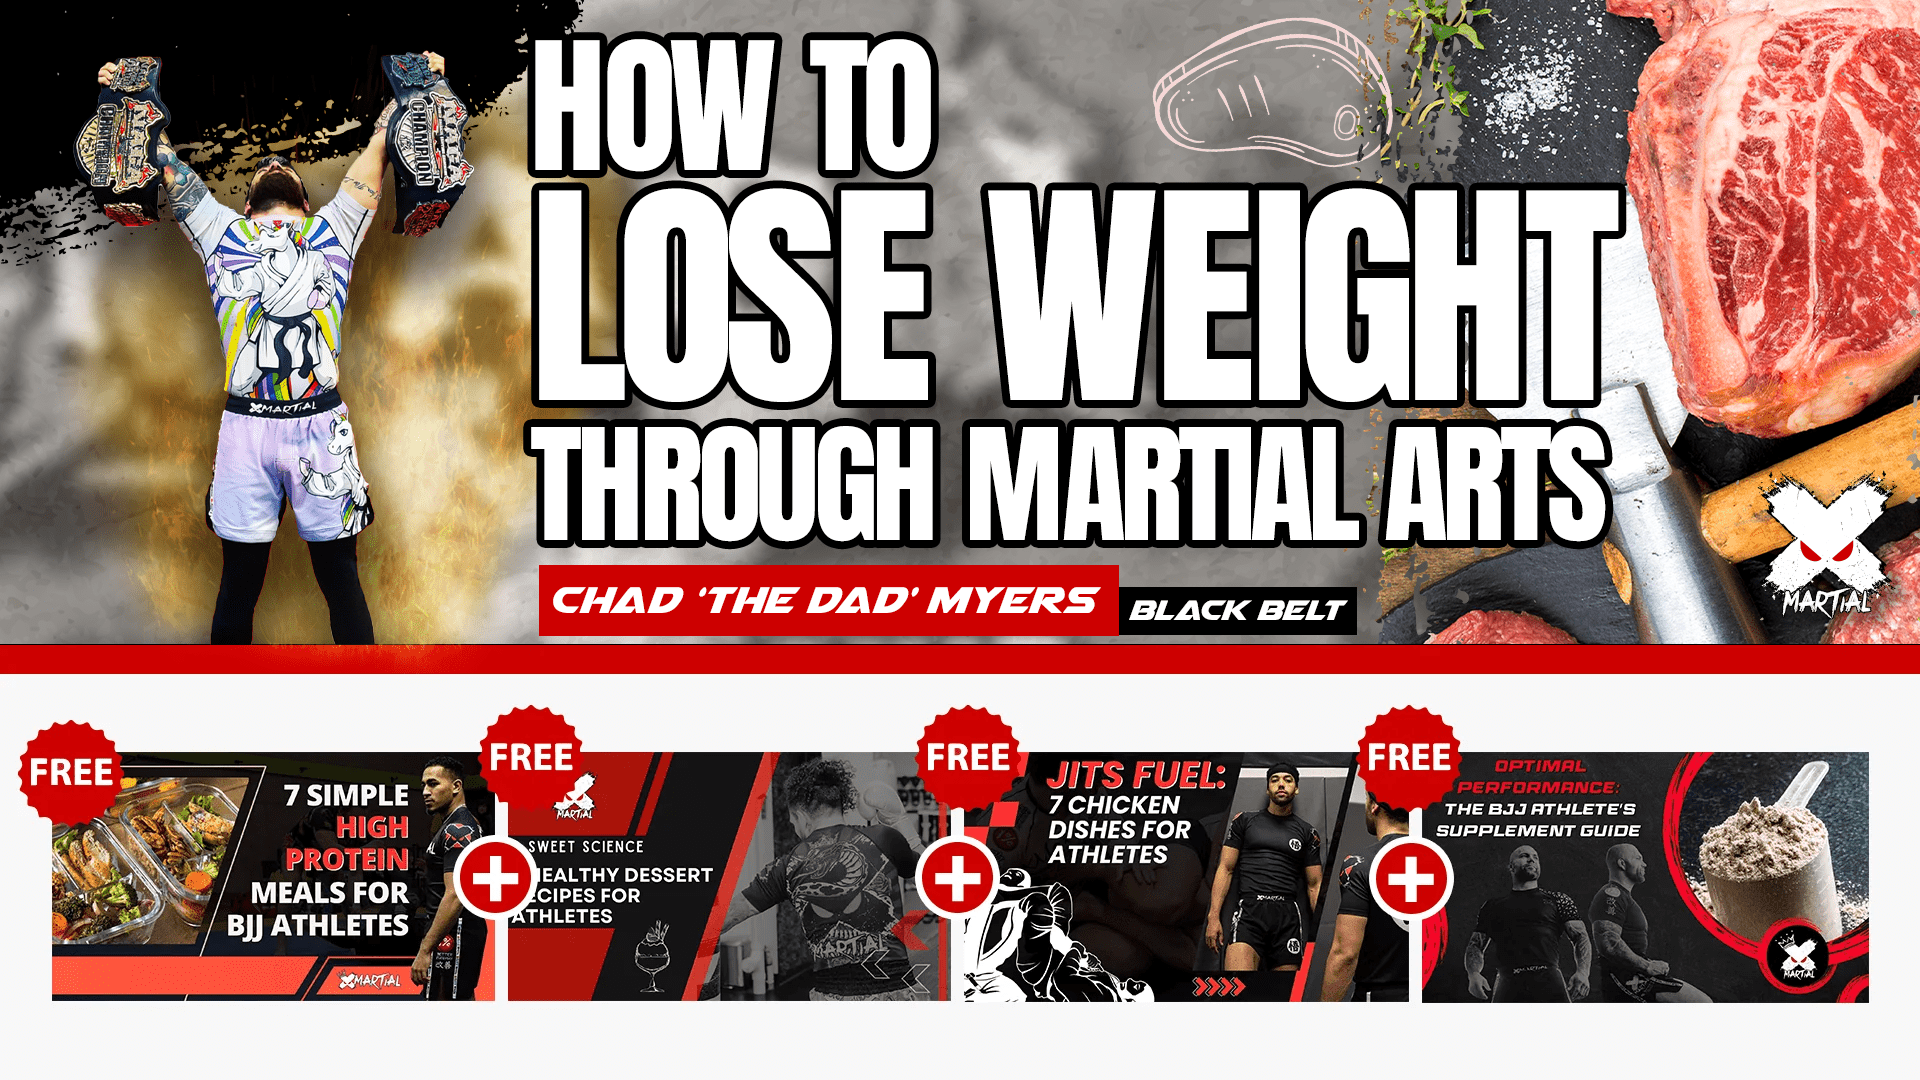 The Ultimate BJJ Weight Loss Course with Free Courses XMARTIAL